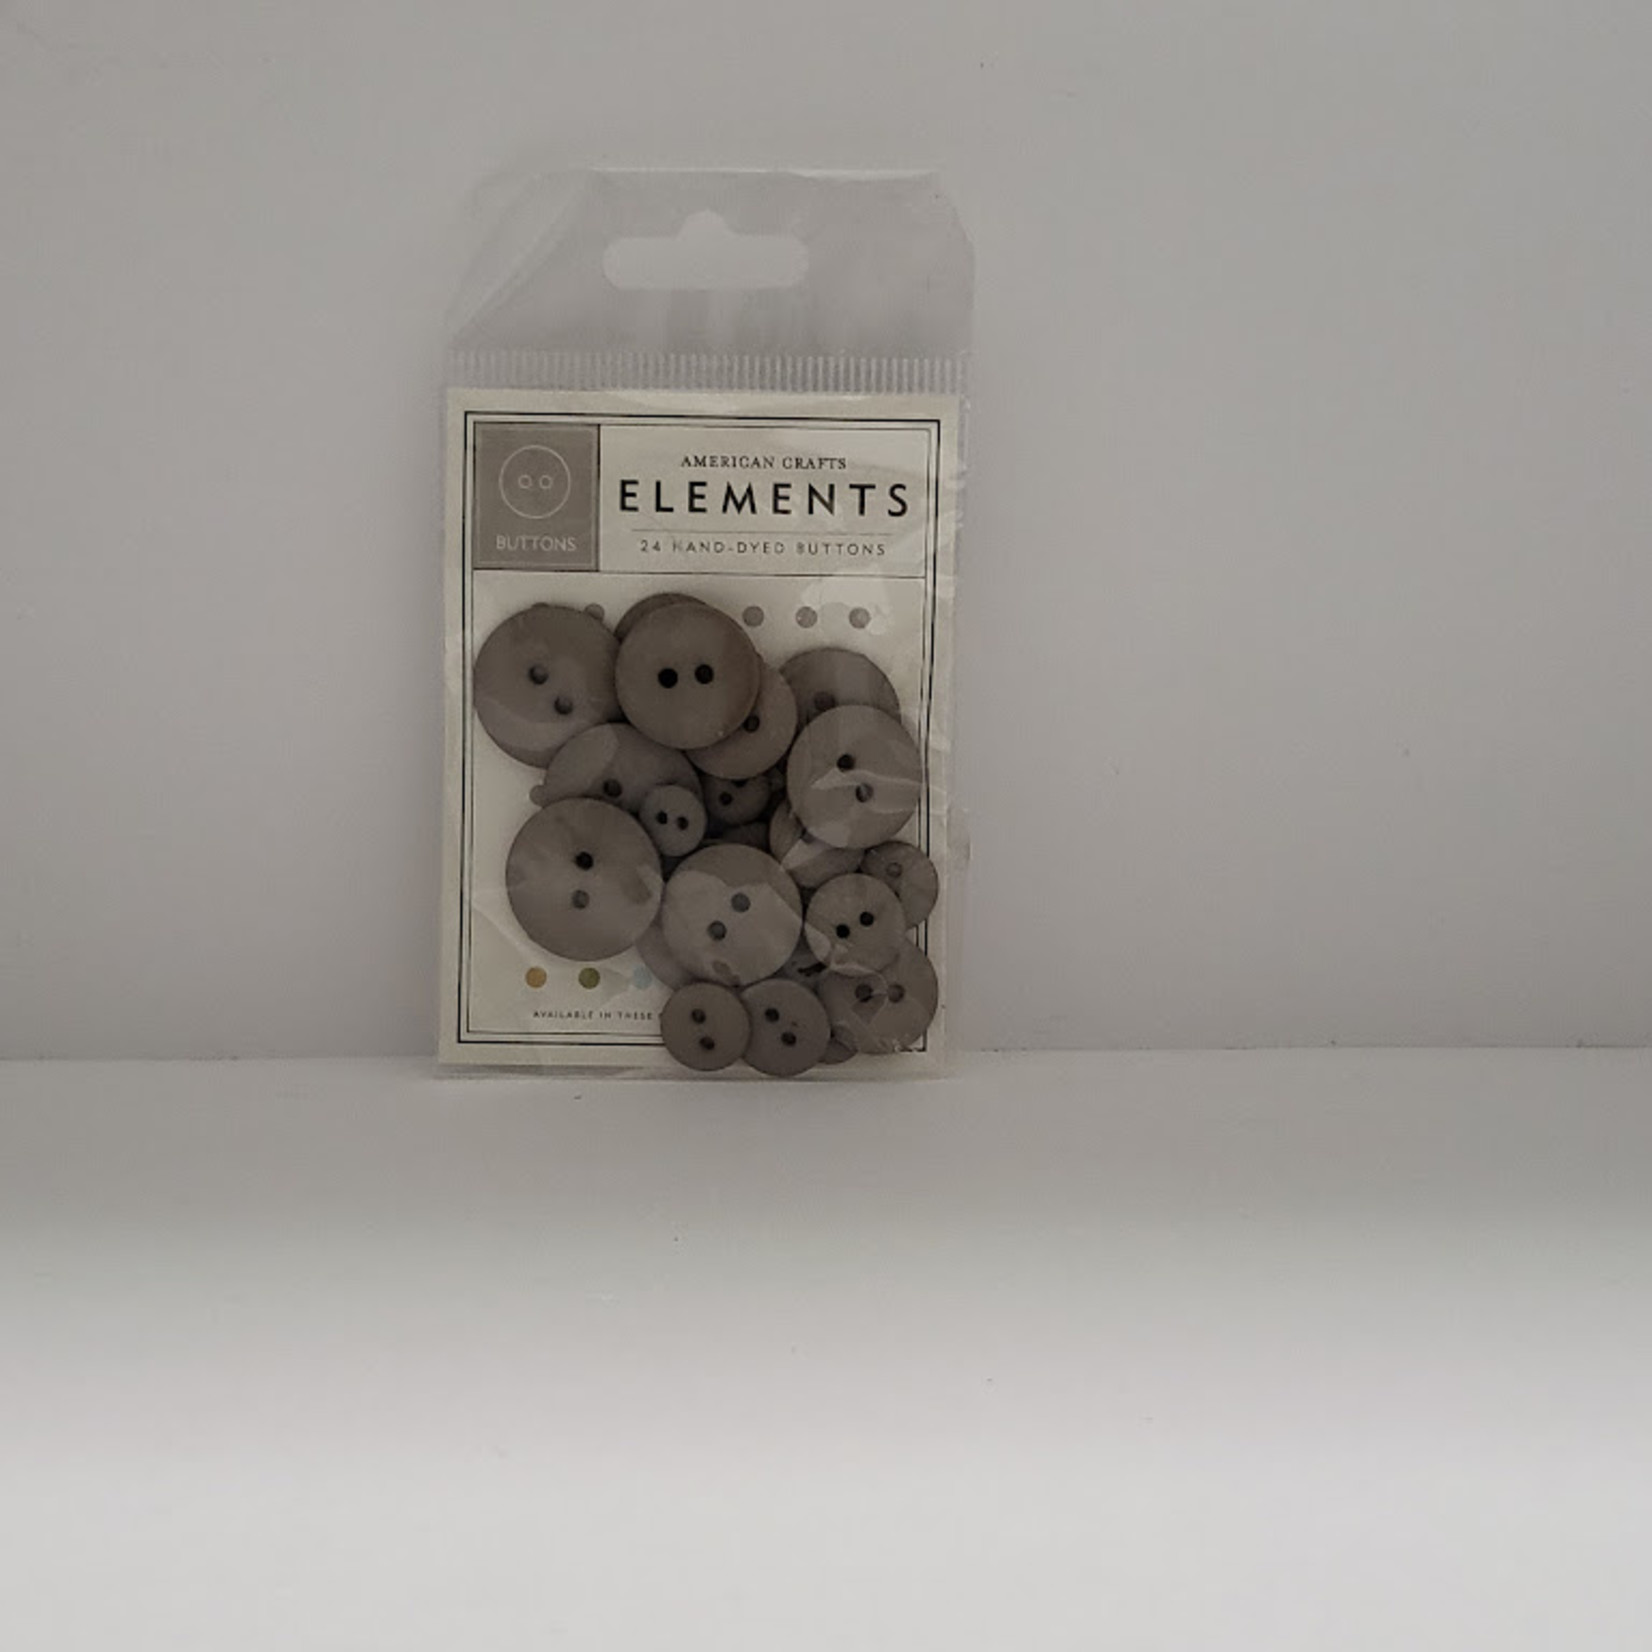 American Crafts Elements - Hand-Dyed Buttons - Grey